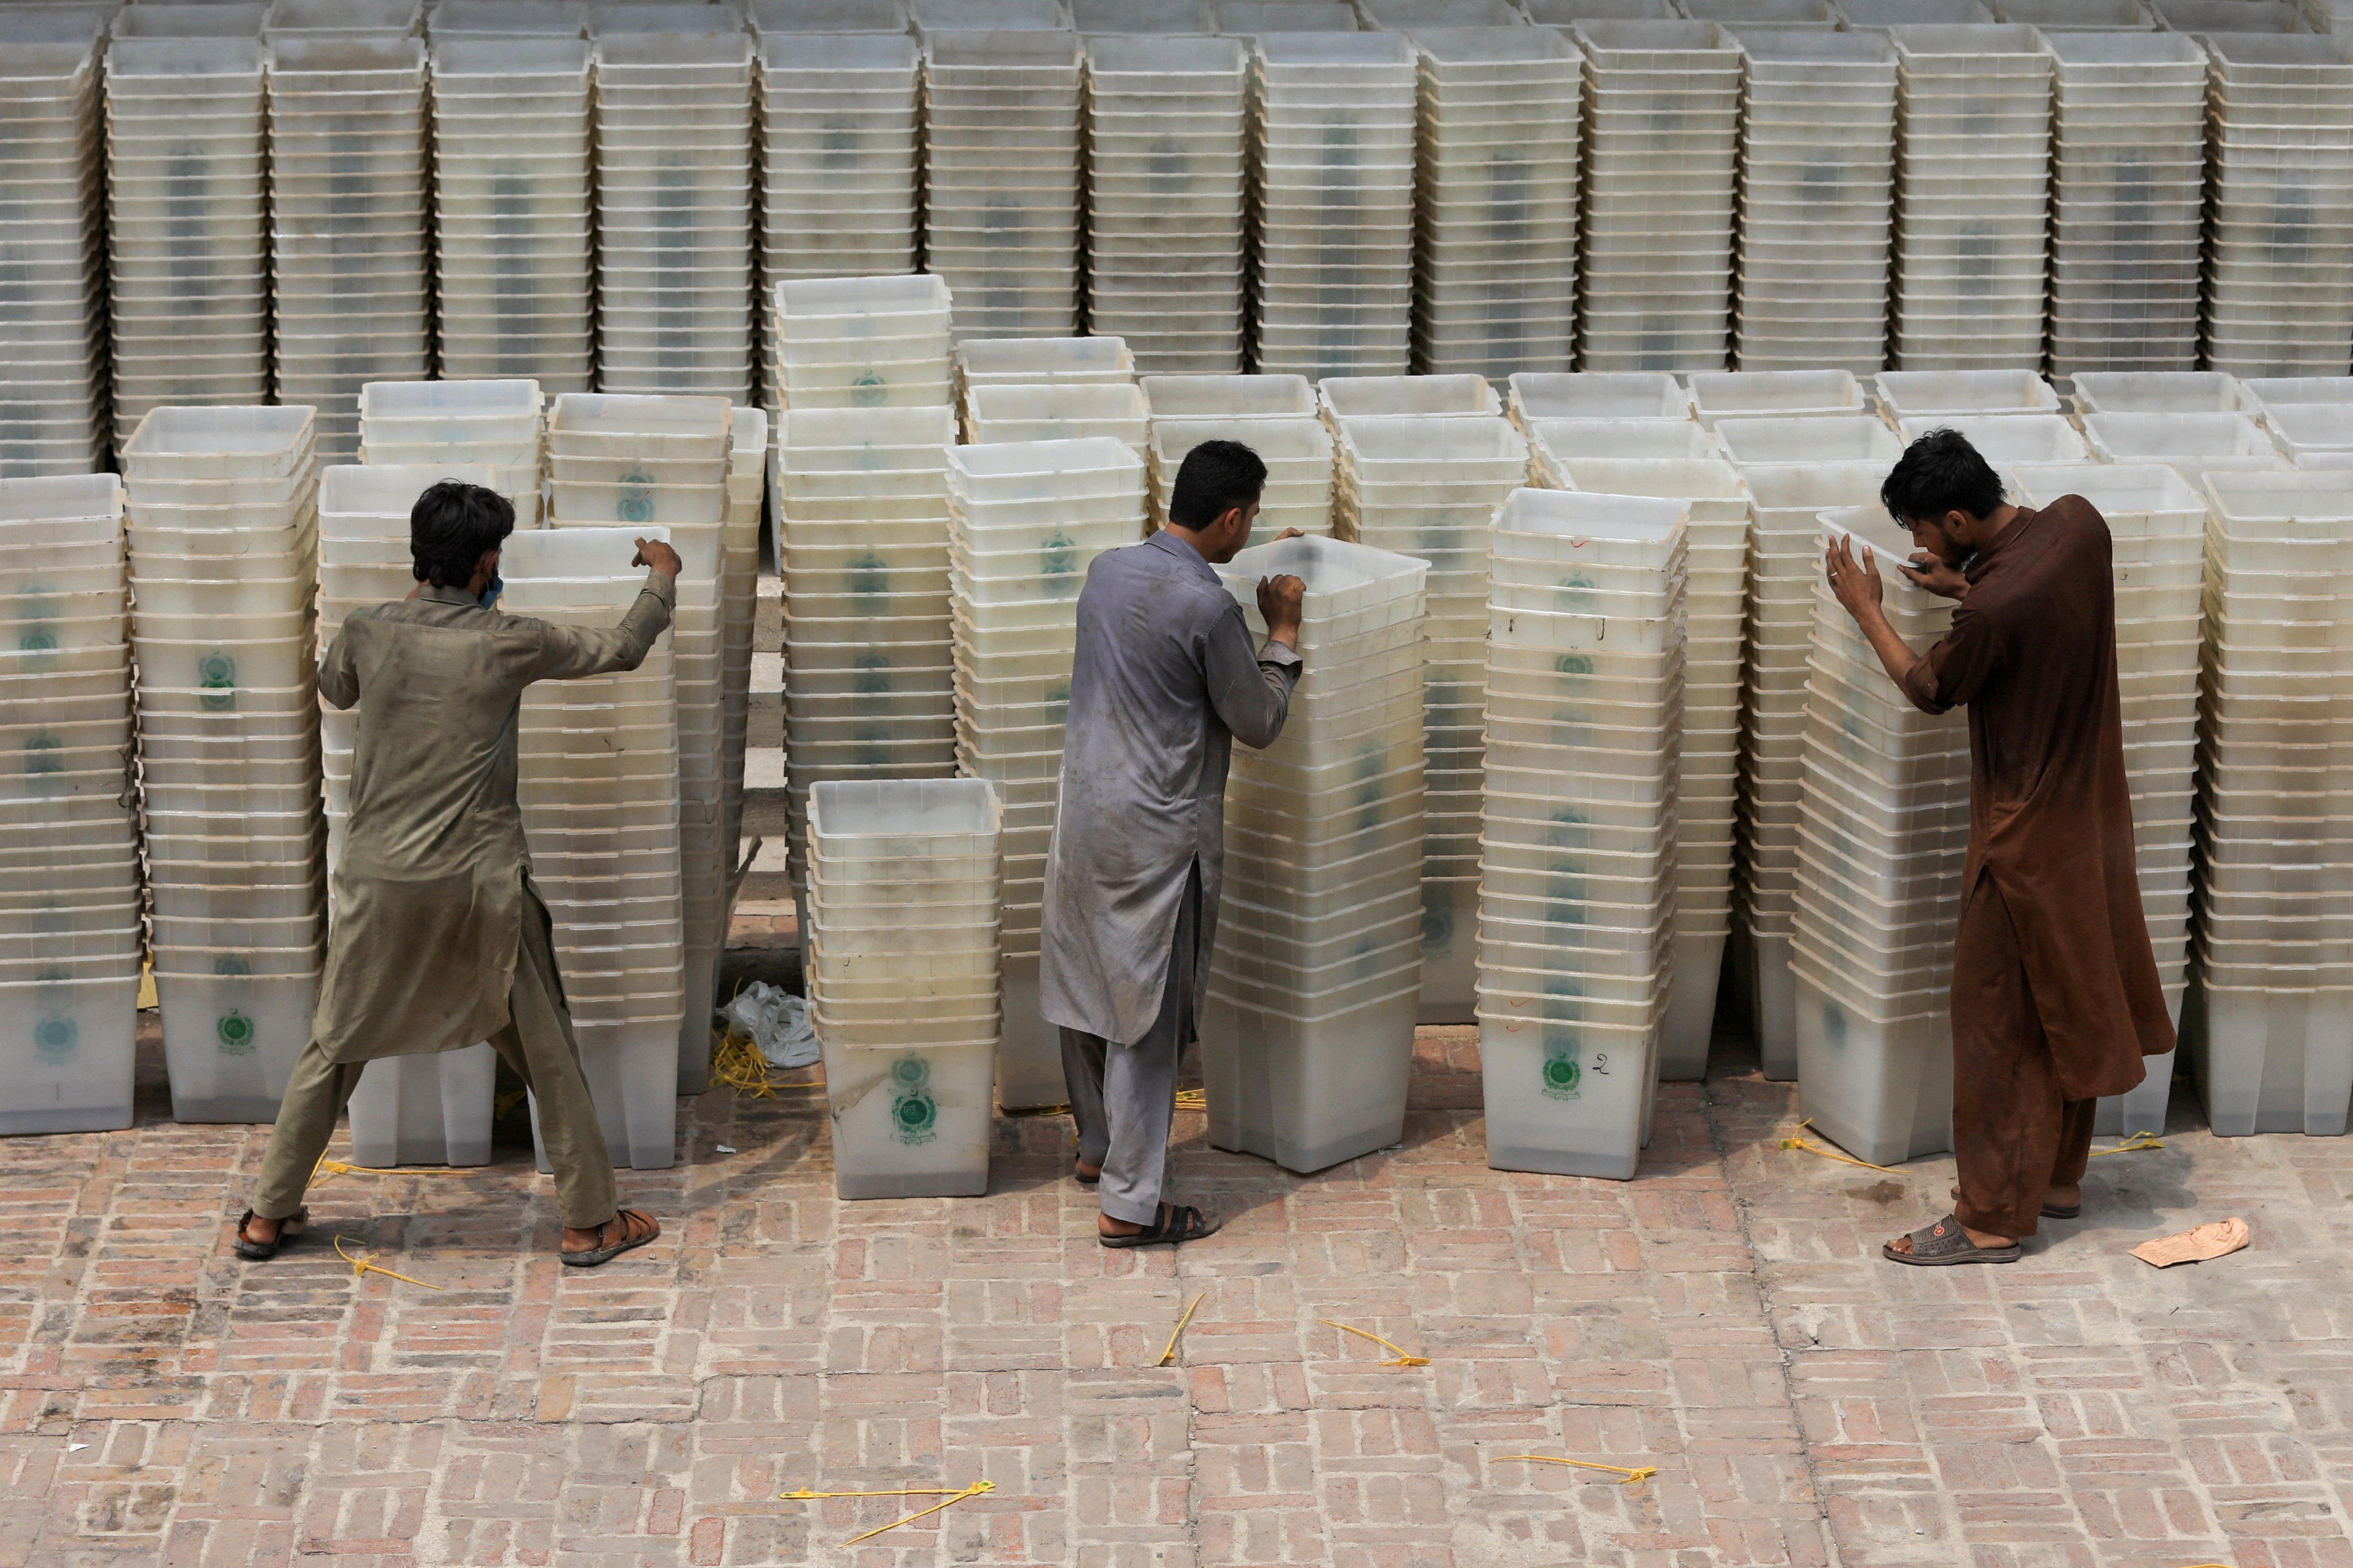 Workers sort out ballot boxes before dispatching them to polling stations ahead of Pakistan’s general election in 2018. Photo: Reuters